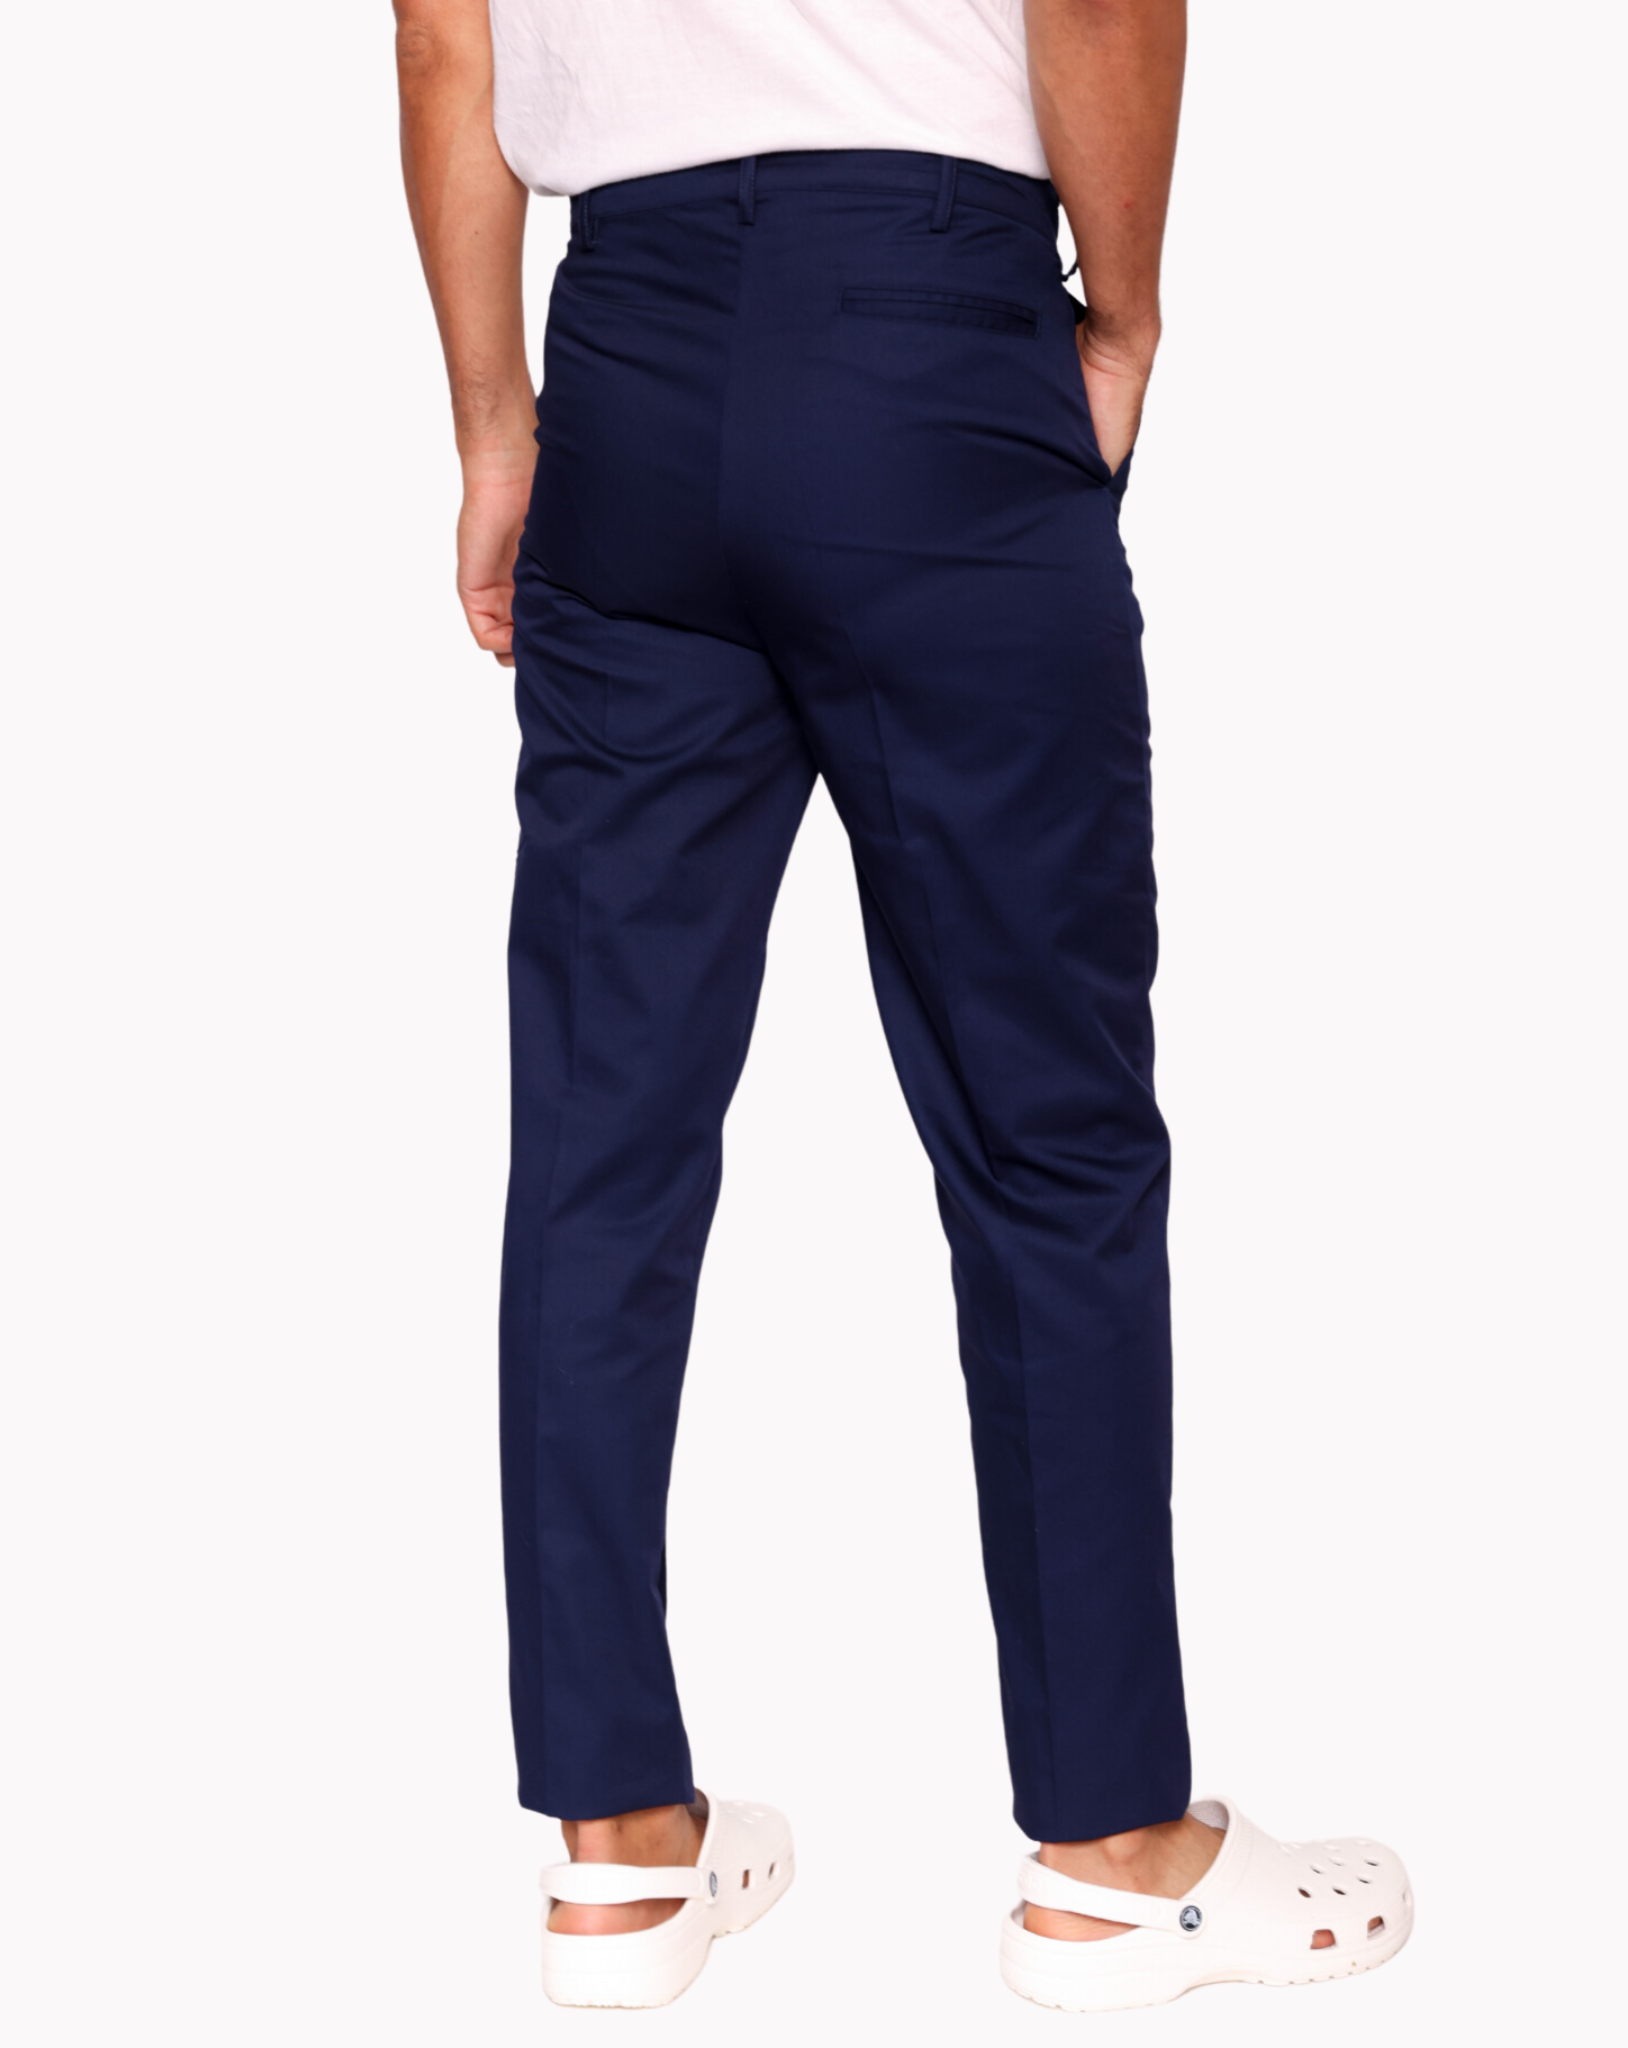 Gibson London | Cobalt Blue Slim Fit Trousers | SuitDirect.co.uk